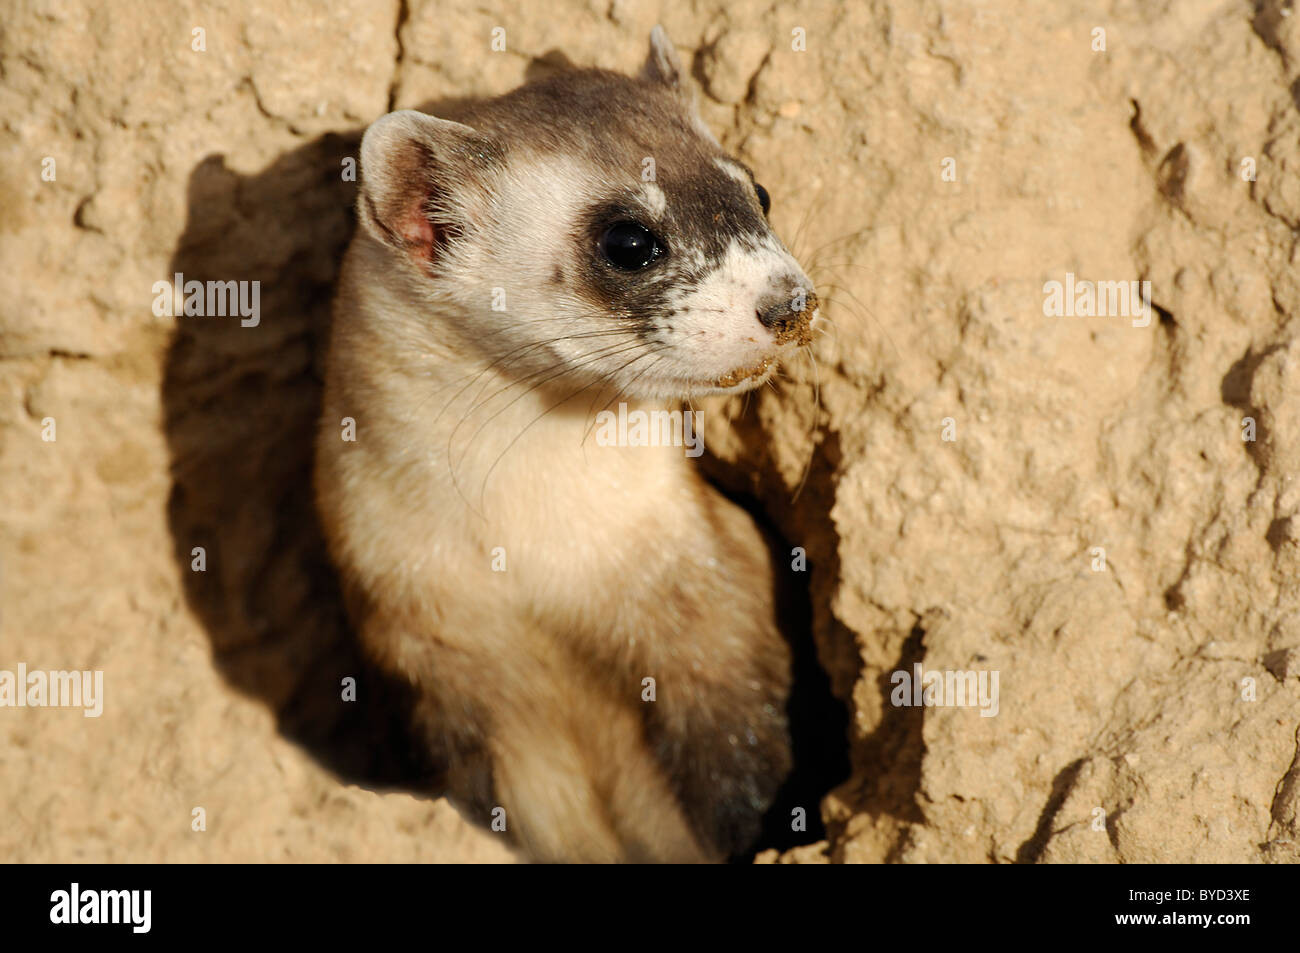 Stock photo of a wild black-footed ferret peering from his burrow.  The ferret was released as part of a reintroduction effort. Stock Photo